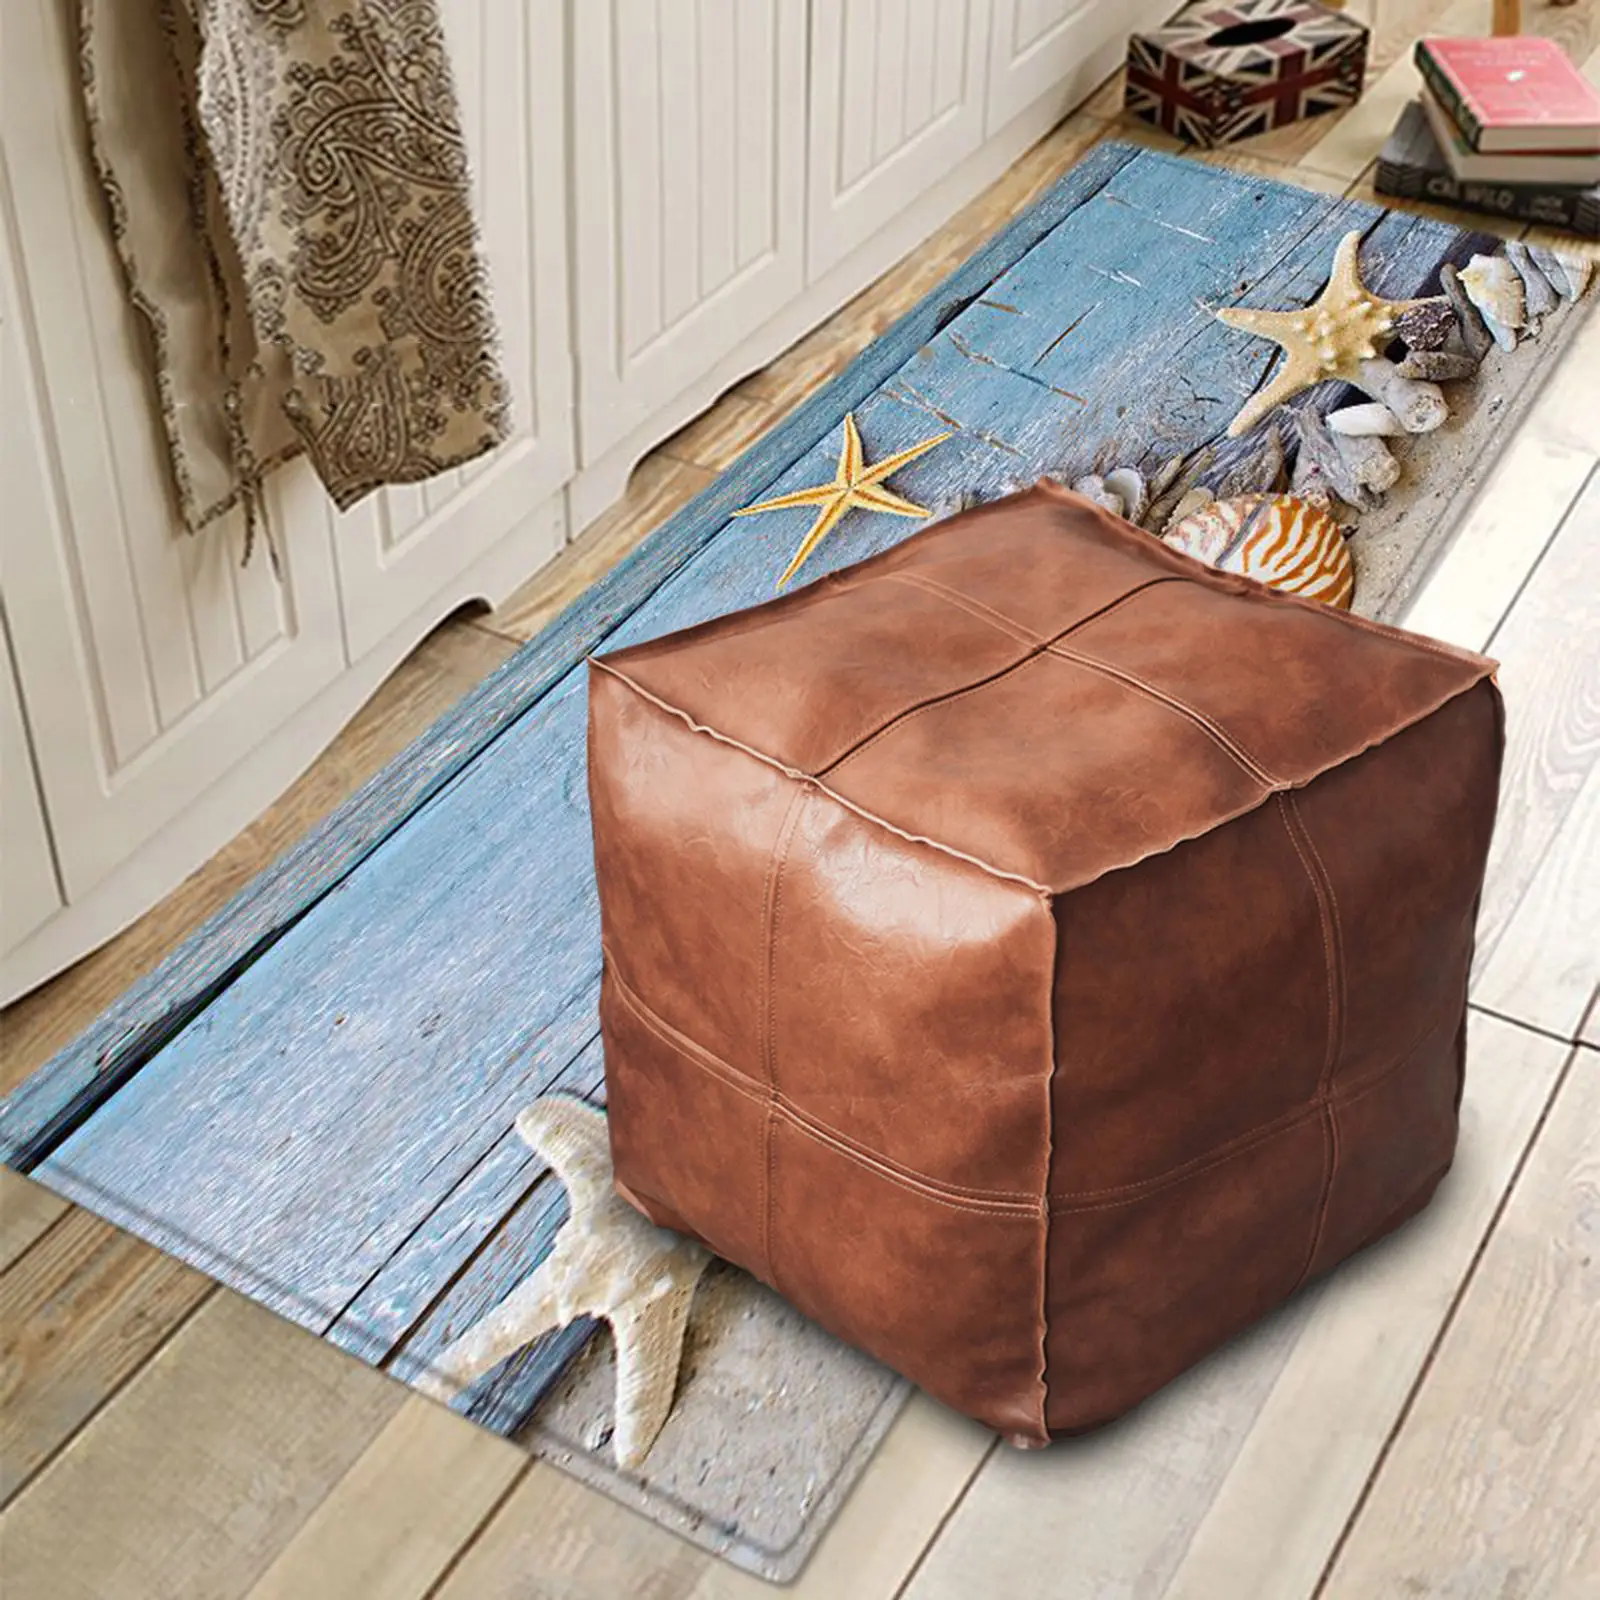 2xBoho Moroccan Pouf Cover Footstool Storage Ottoman Room Decor Living Room square brown